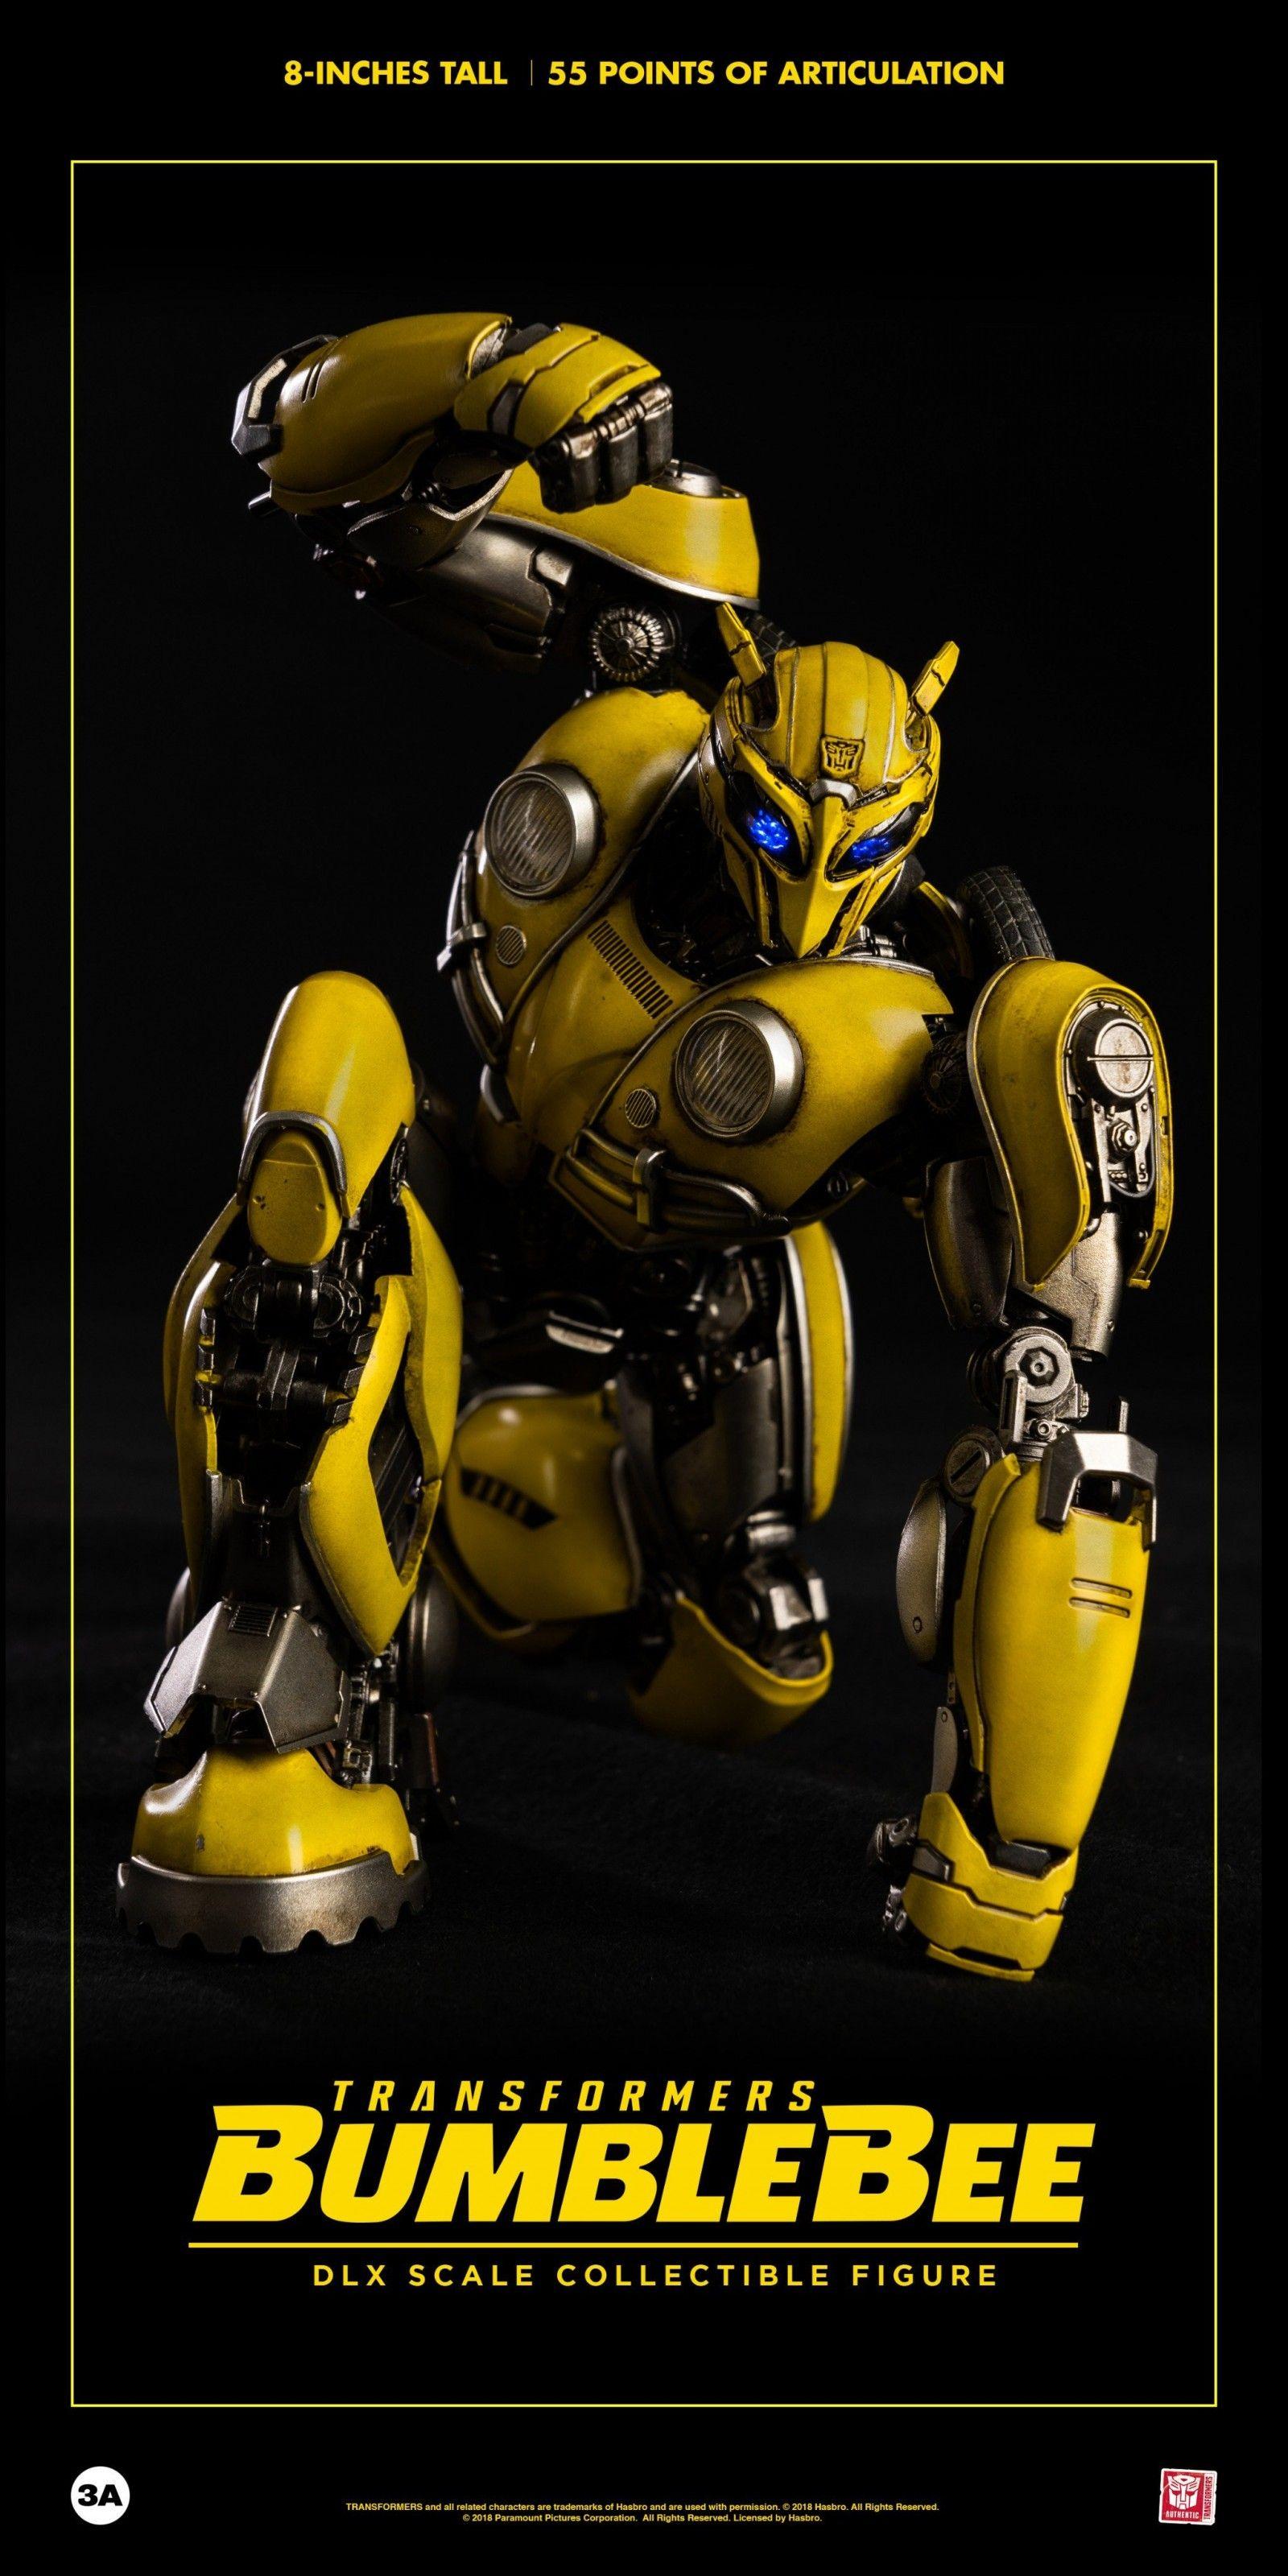 DLX BUMBLEBEE. Transformers bumblebee, Transformers poster